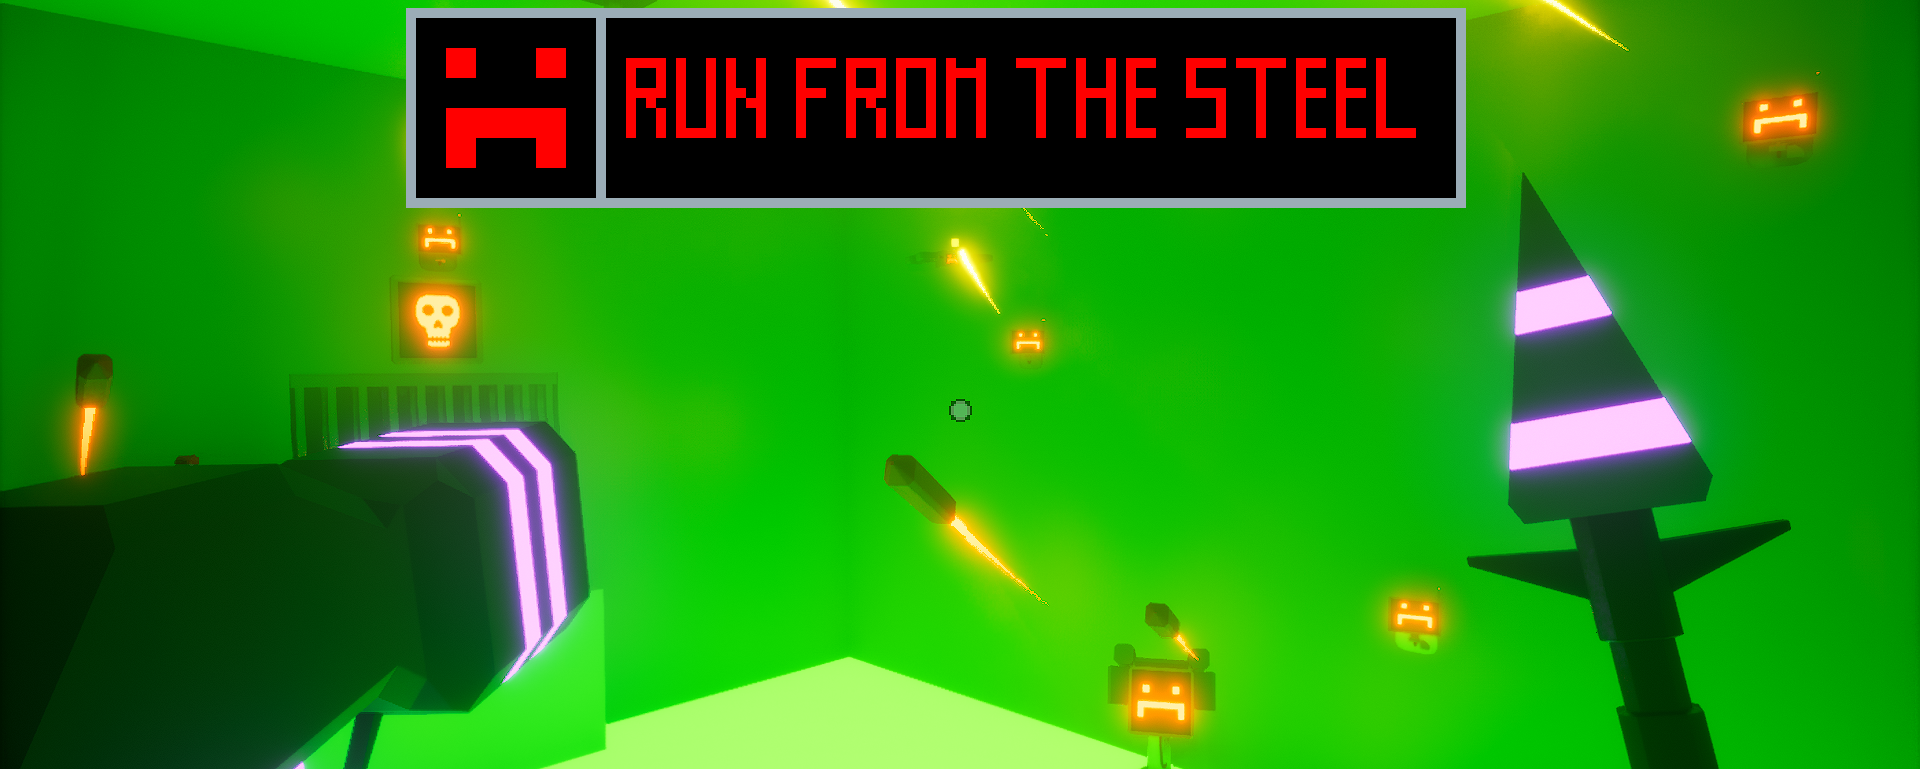 RUN FROM THE STEEL - REMASTERED